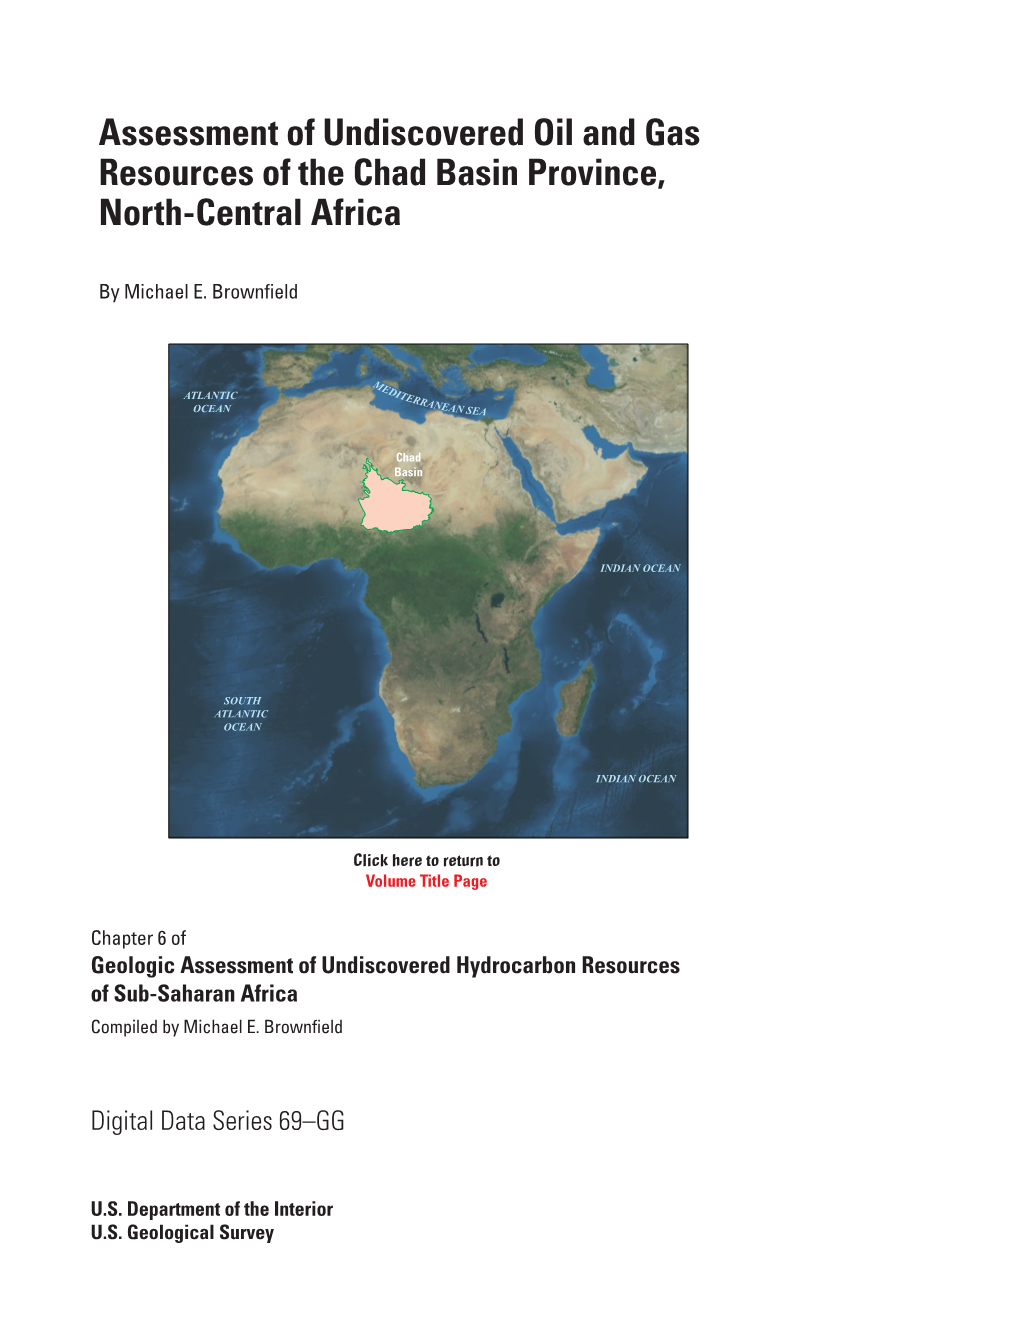 Assessment of Undiscovered Oil and Gas Resources of the Chad Basin Province, North-Central Africa